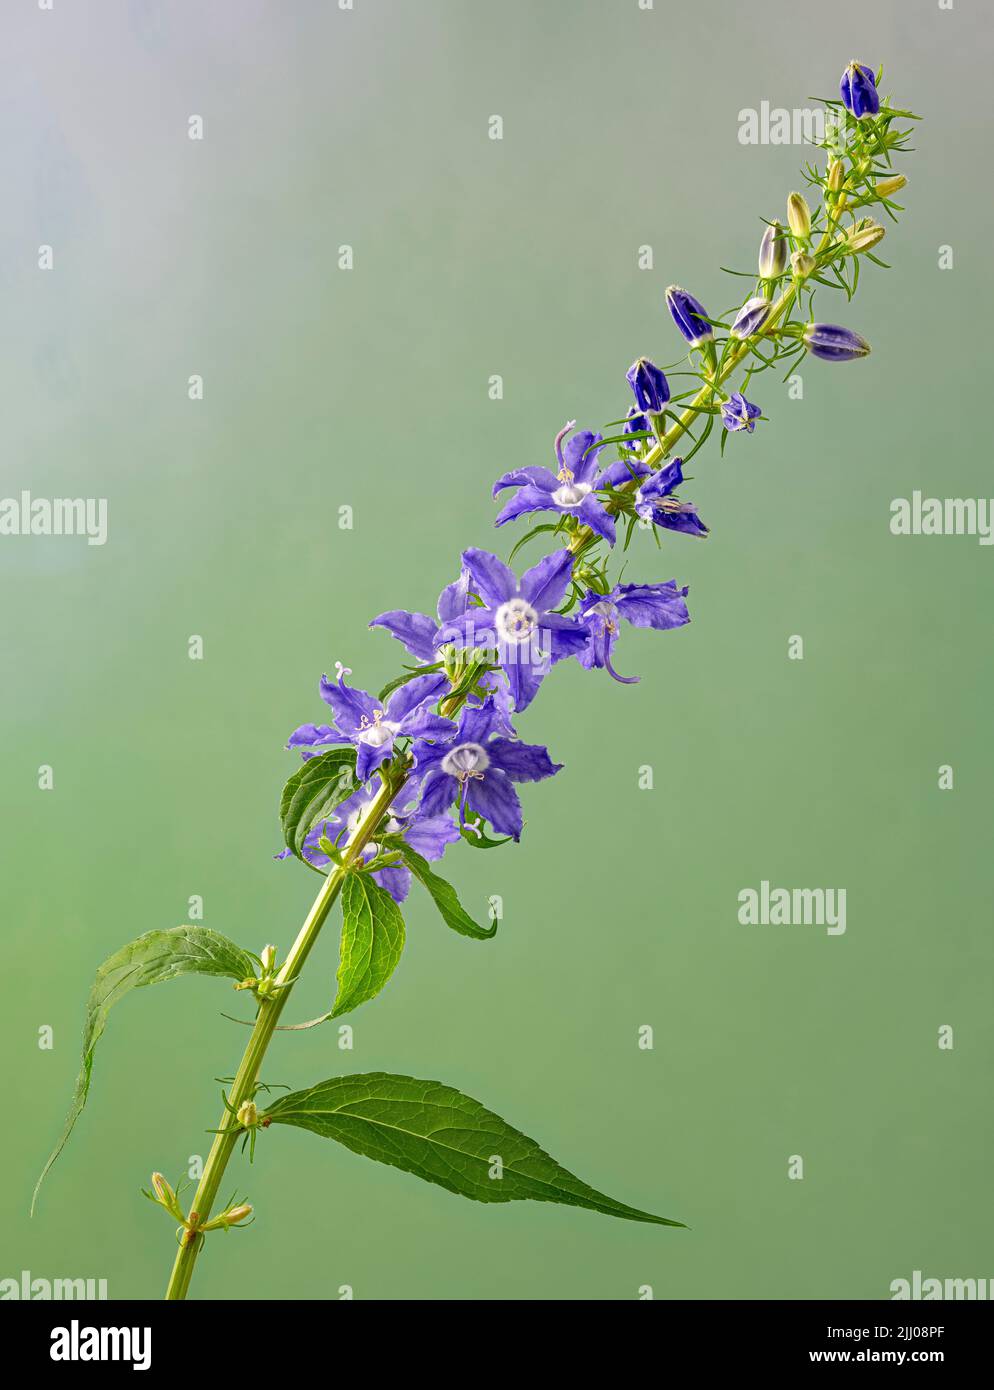 Tall bellflower (Campanula americana) blooming in early summer. Native to eastern half of U.S. and Canada. Stock Photo